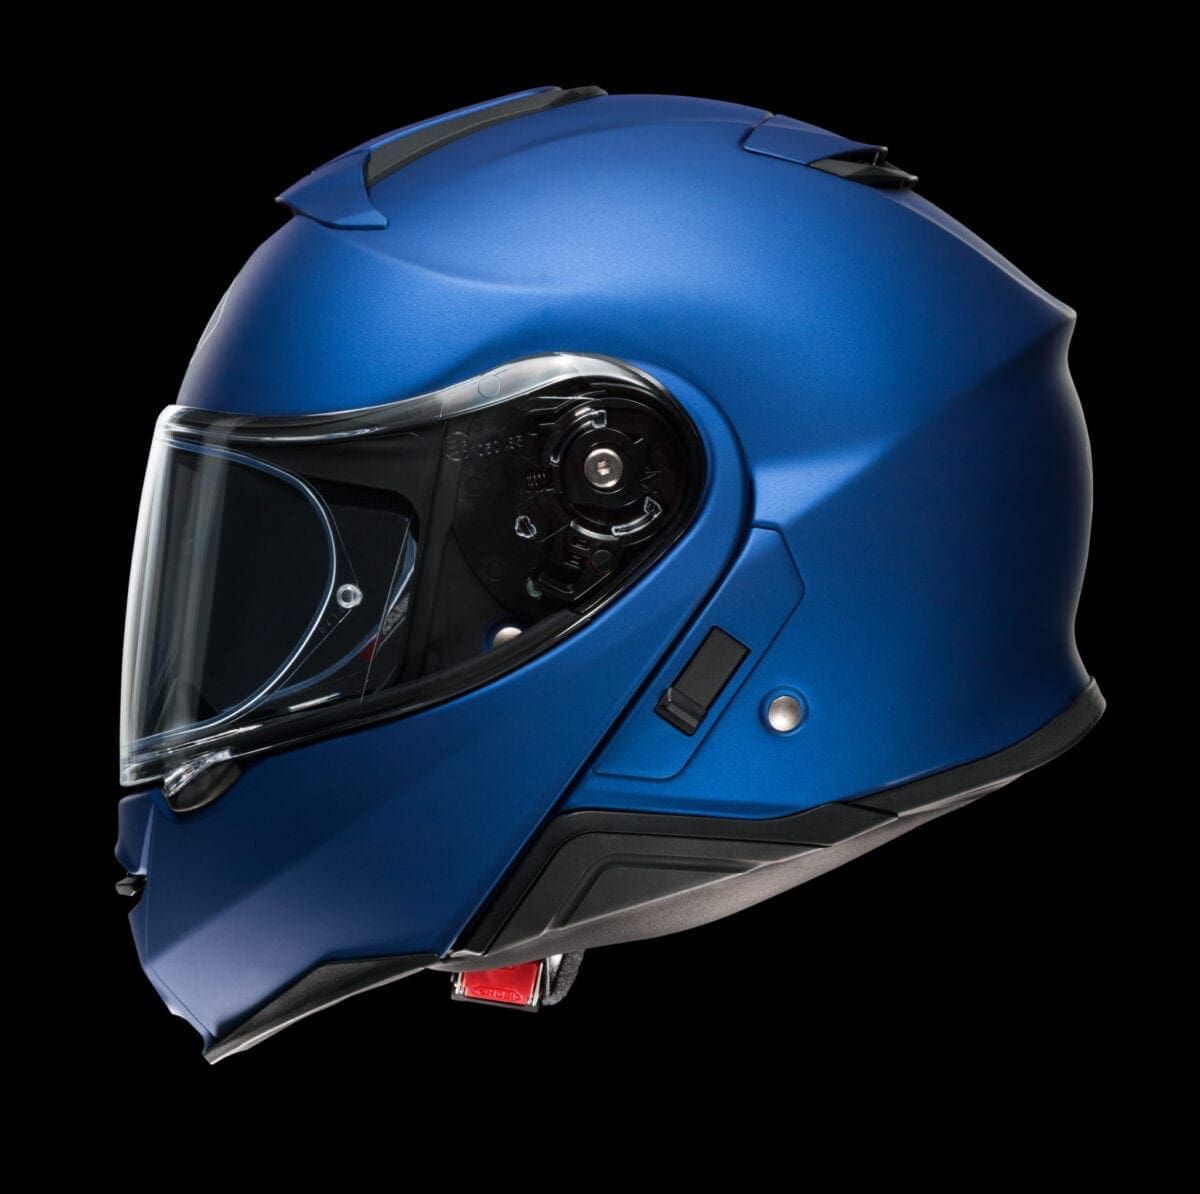 VIDEO: EXCLUSIVE first look at the all-new Shoei NEOTEC II helmet